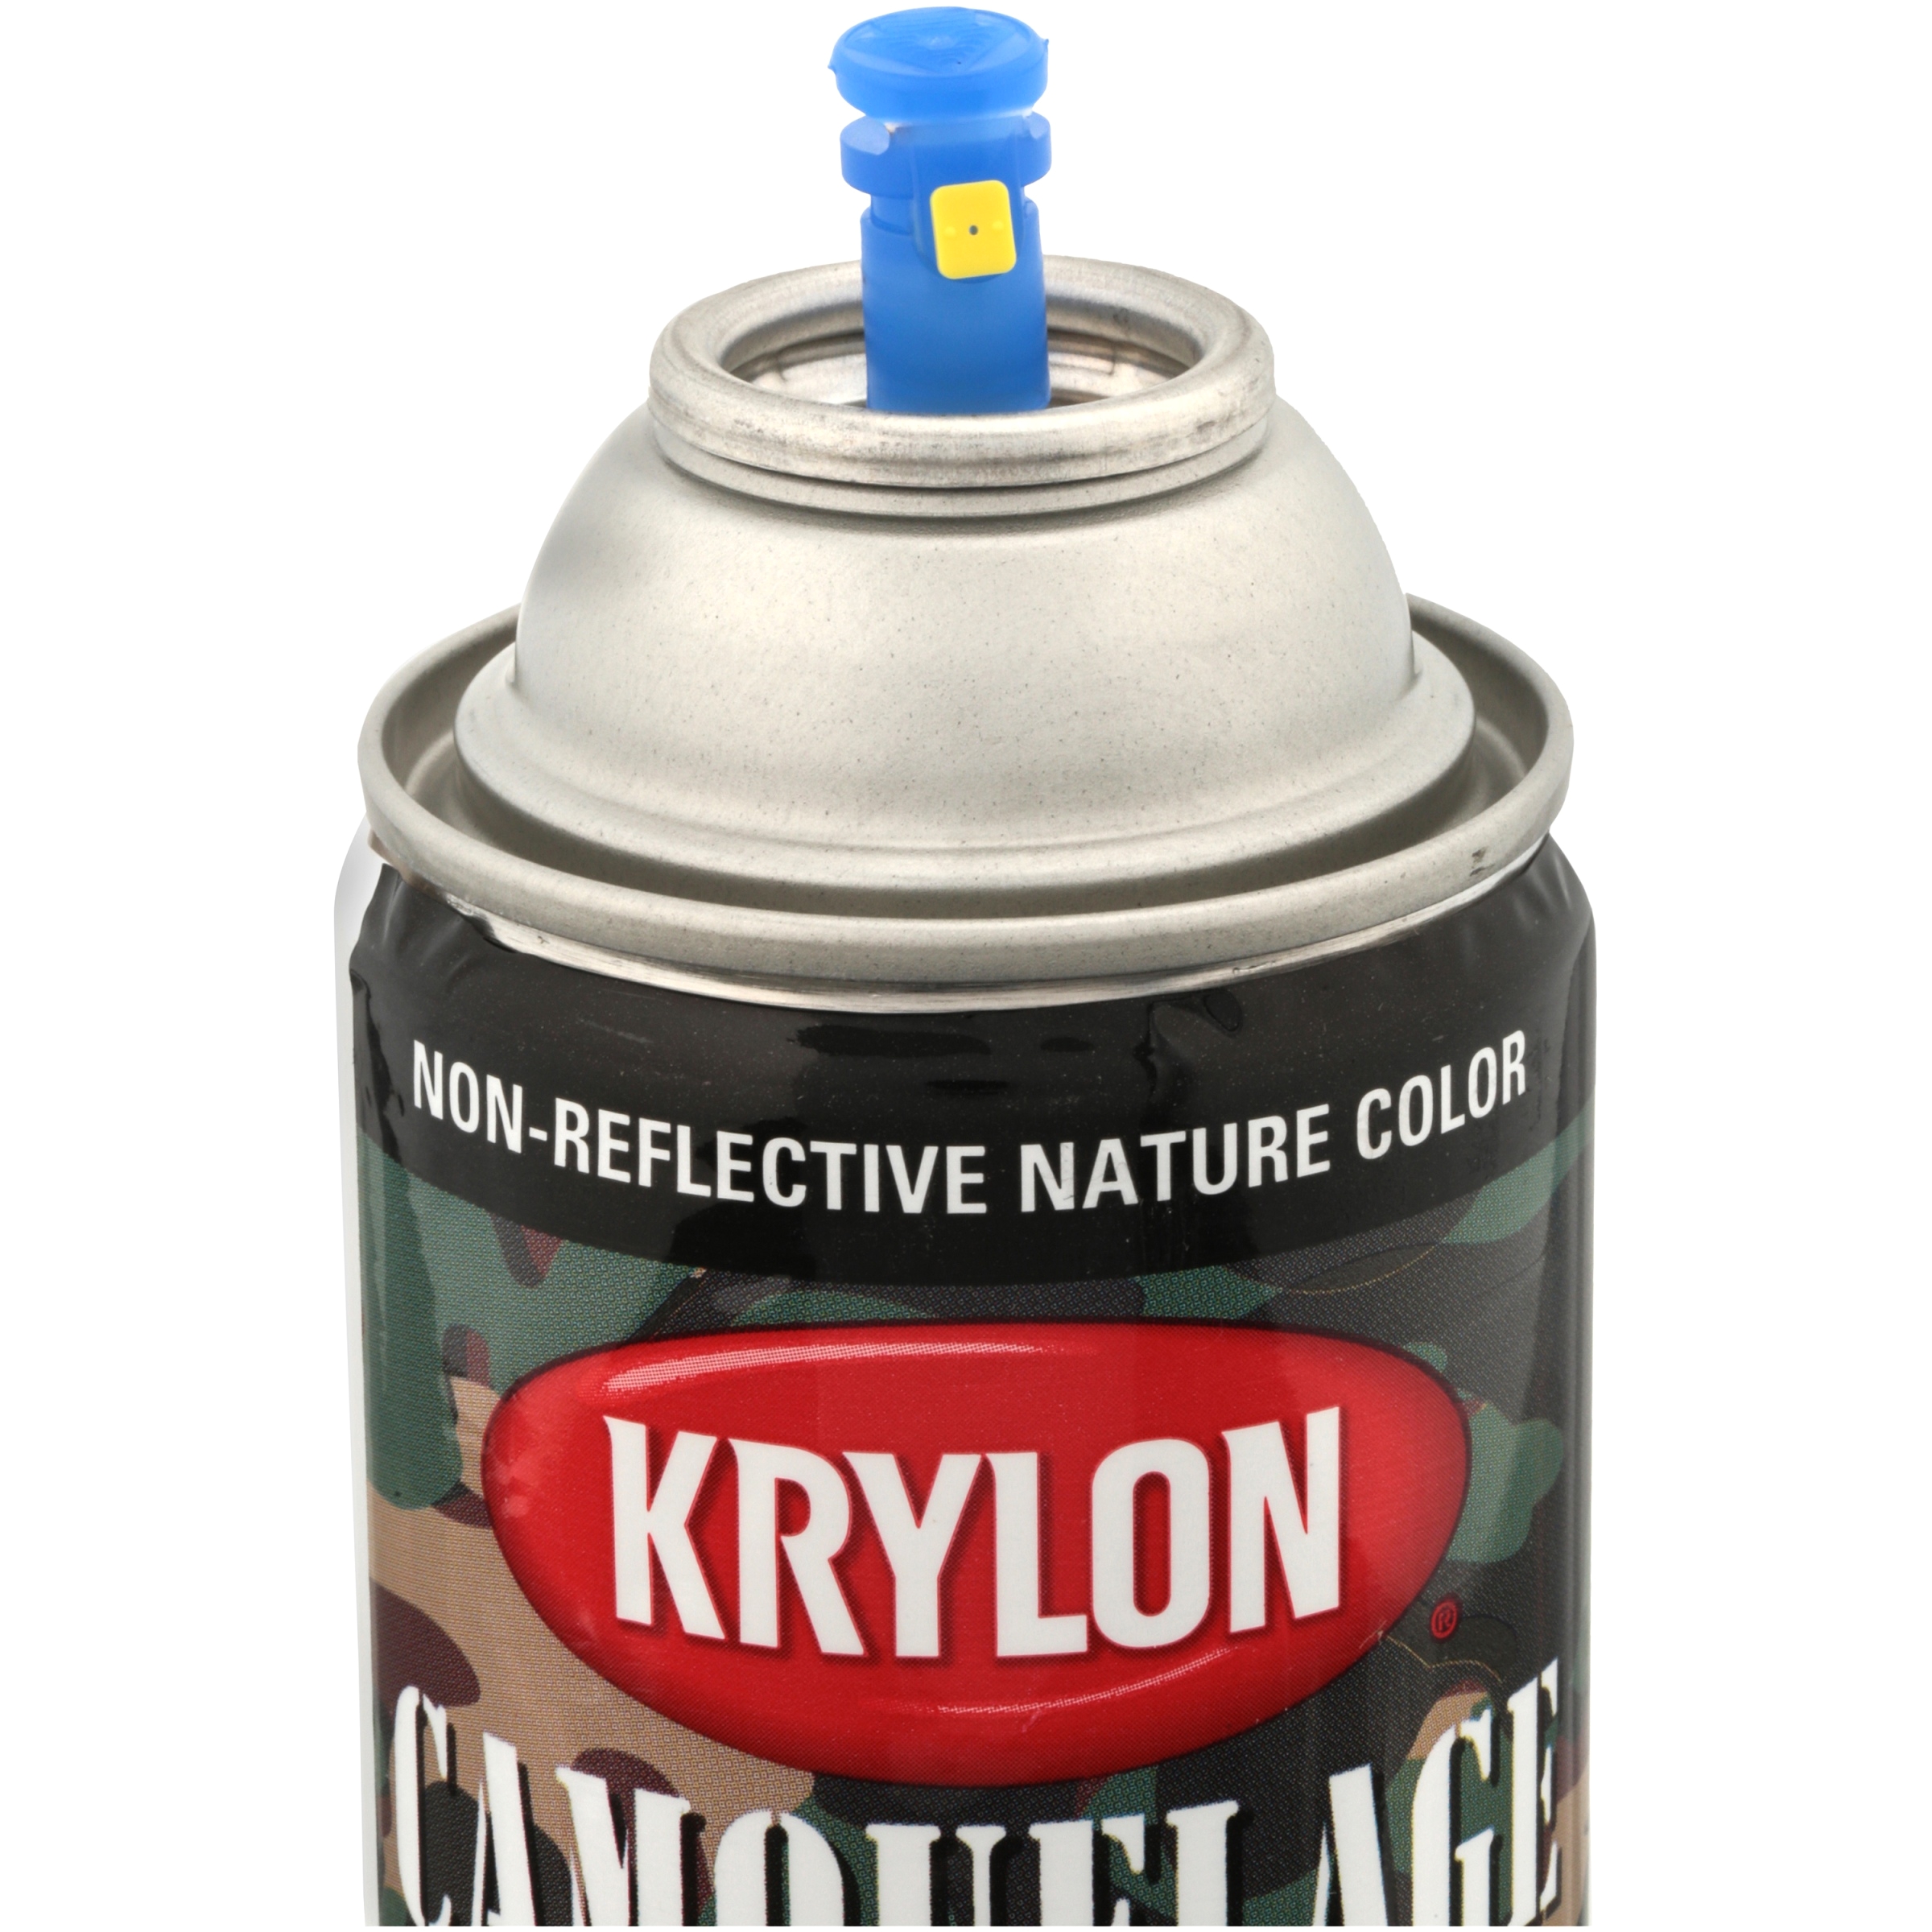 krylona ultra flat non reflective nature color olive camouflage spray paint 11 oz can walmart com